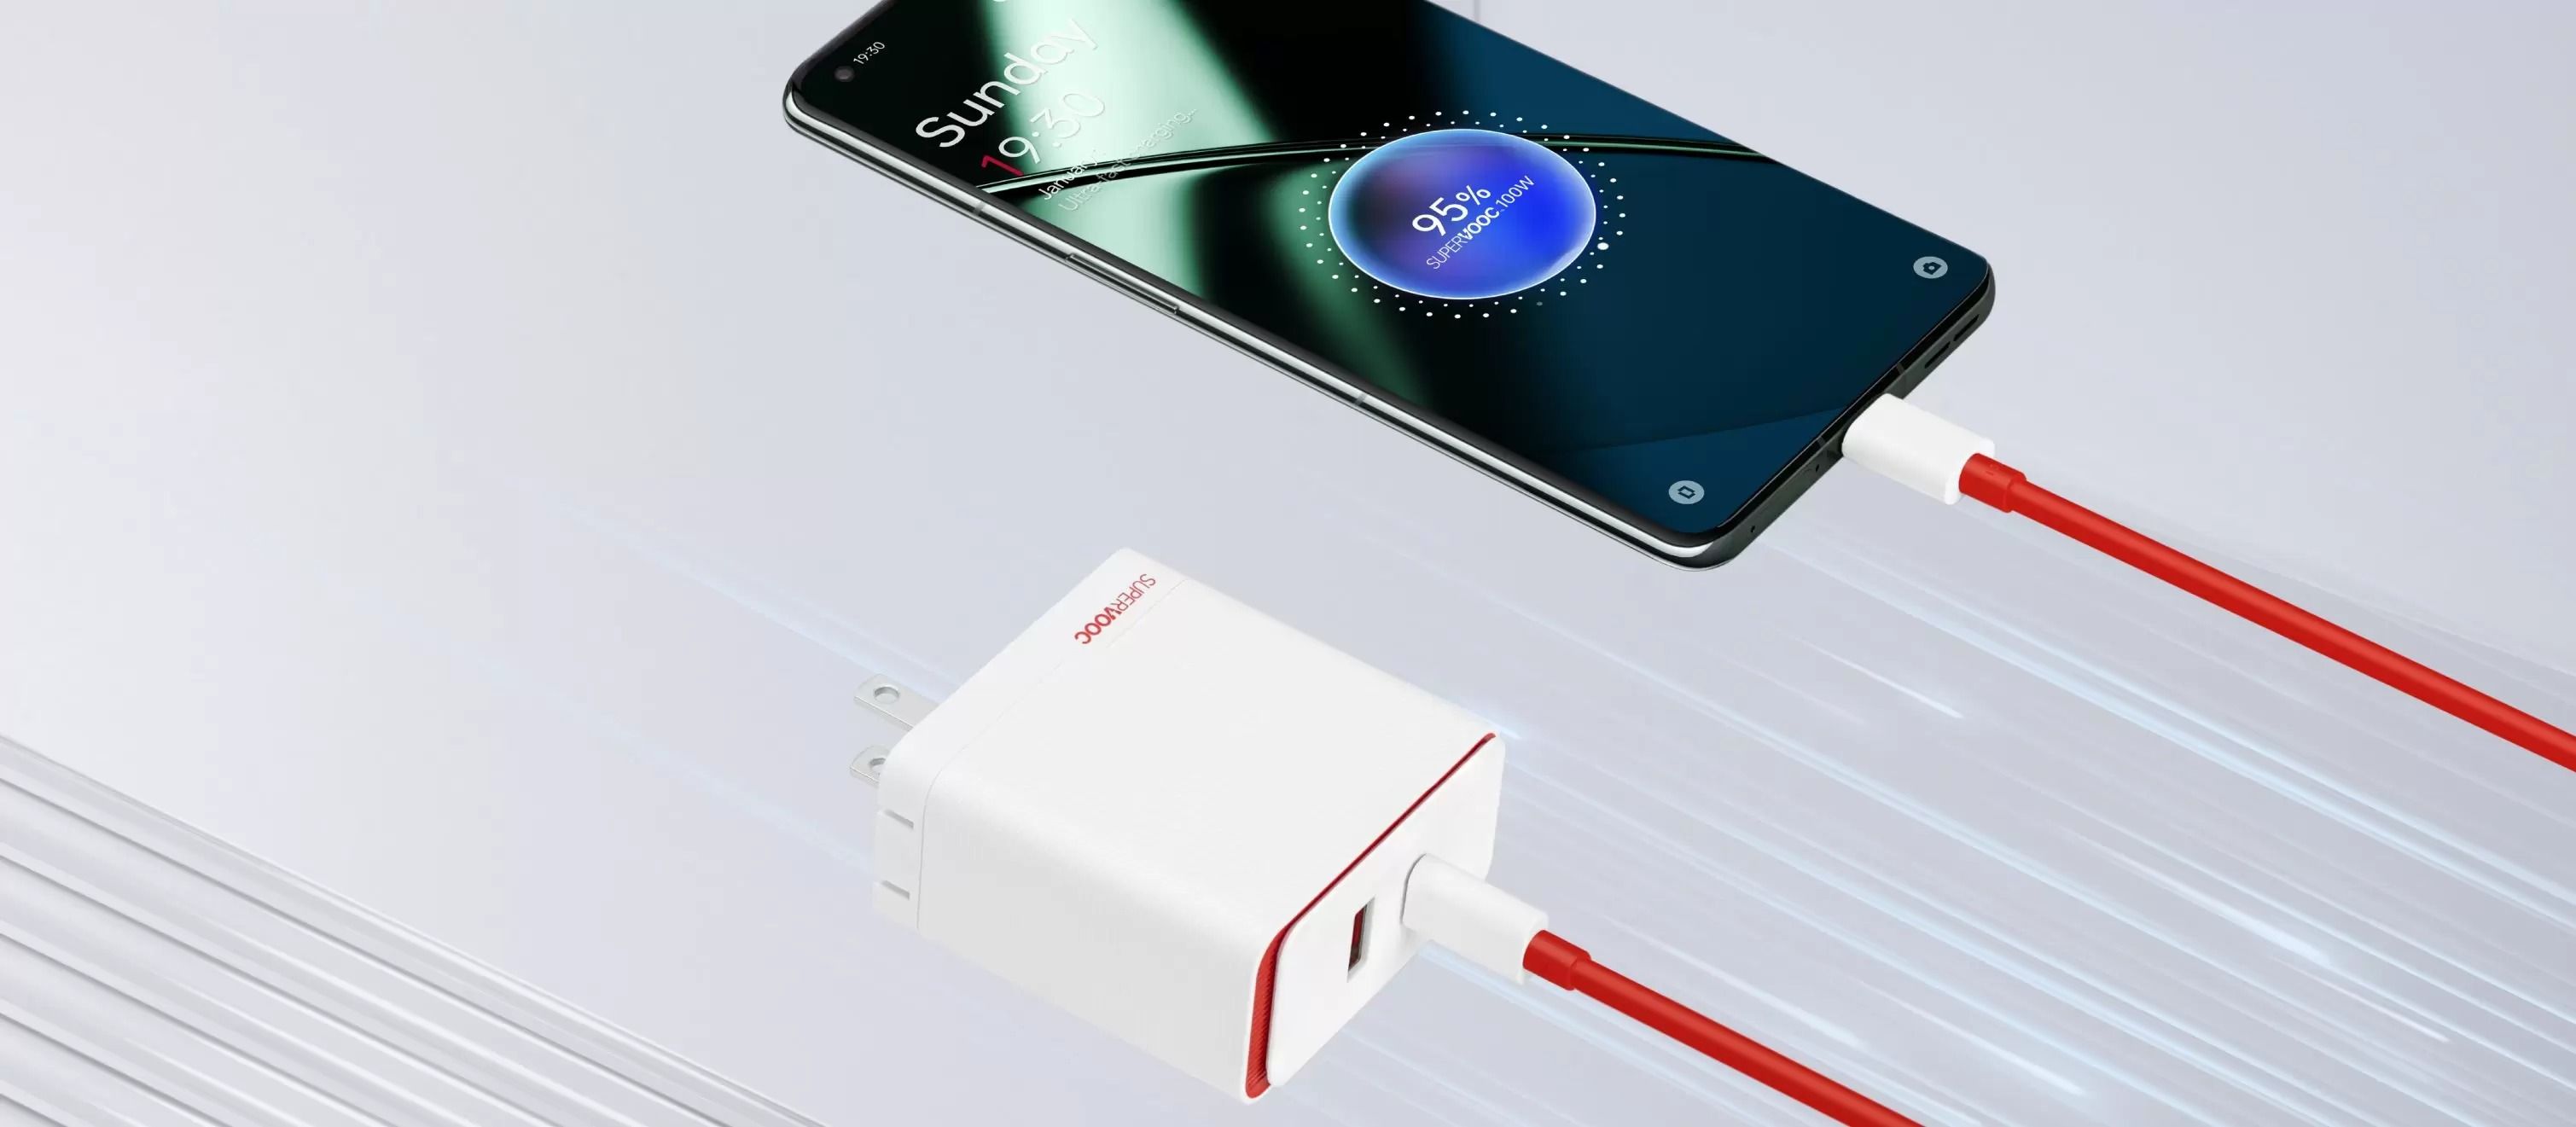 A OnePlus charging brick, cable, and device